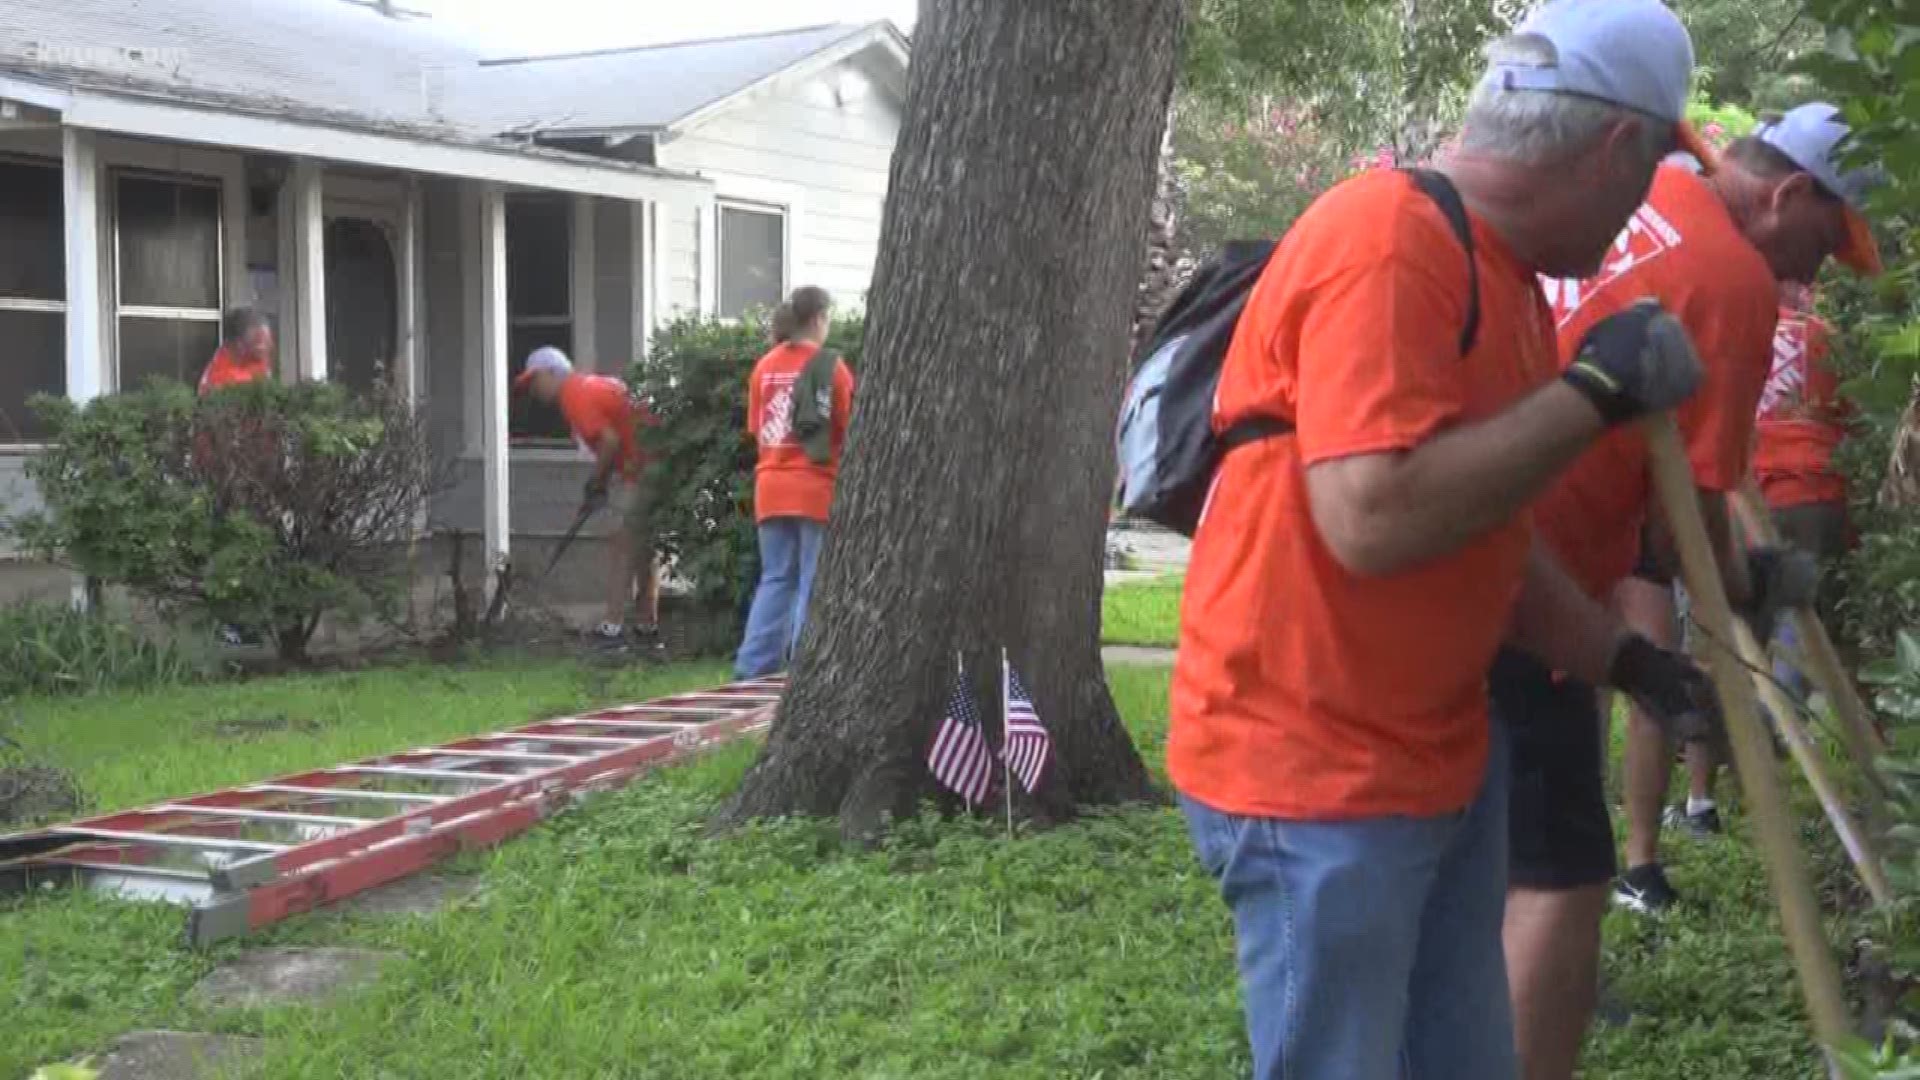 A section of the Holly neighborhood in East Austin was shut down today as 600 volunteers took over to make repairs to the houses of local veterans.